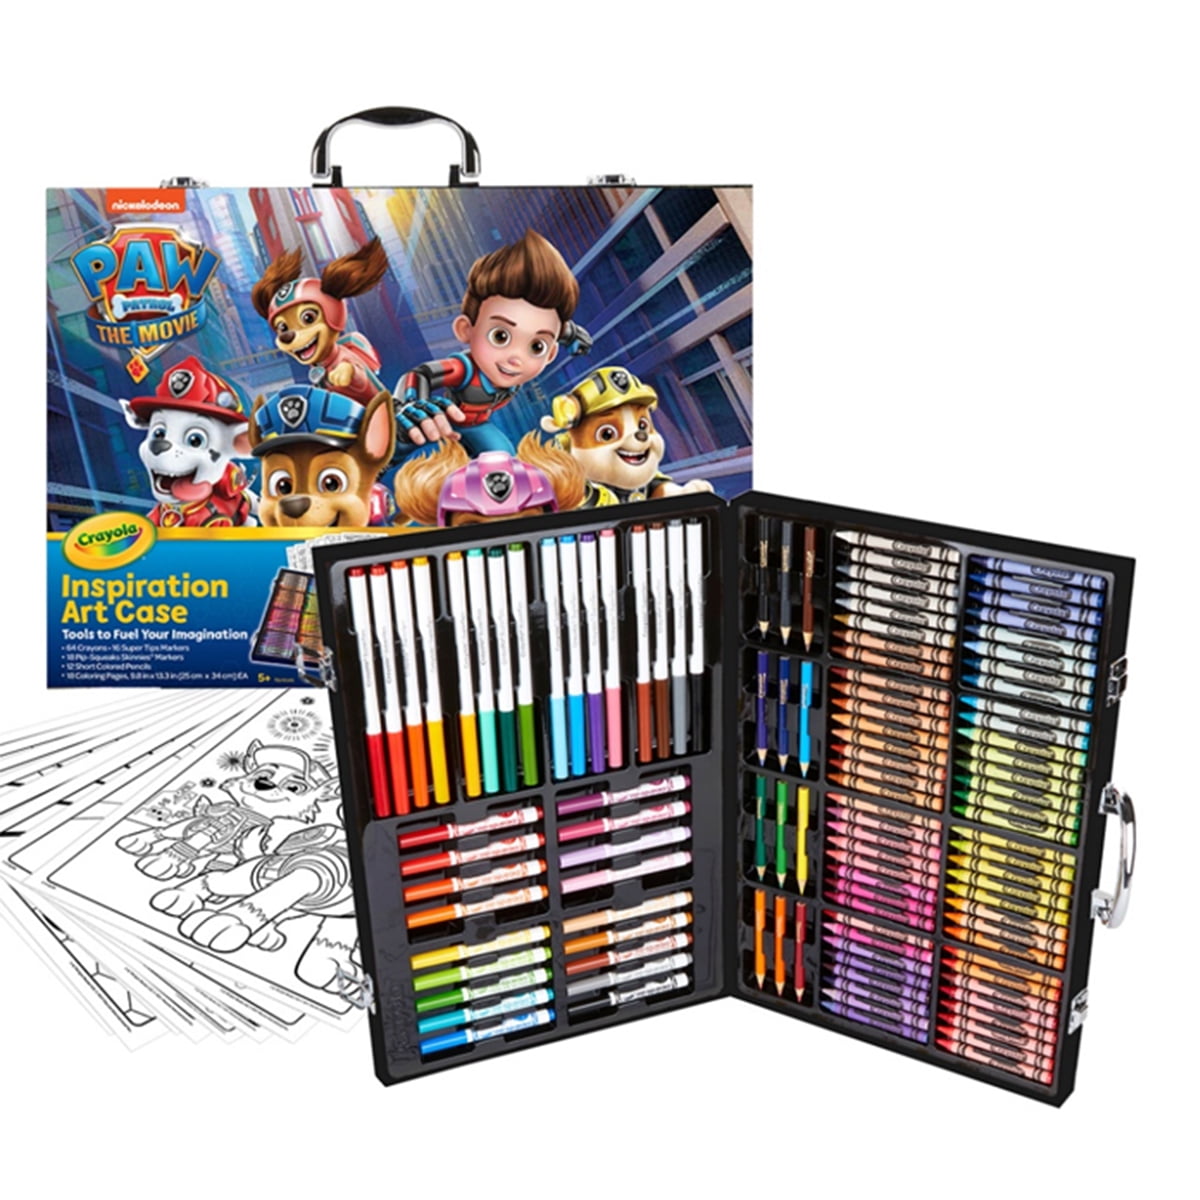 Crayola Inspiration Crayons Art Case 128 Pieces, Crayons, Super Tips  Markers, Colored Pencils Set, Gifts for Kids